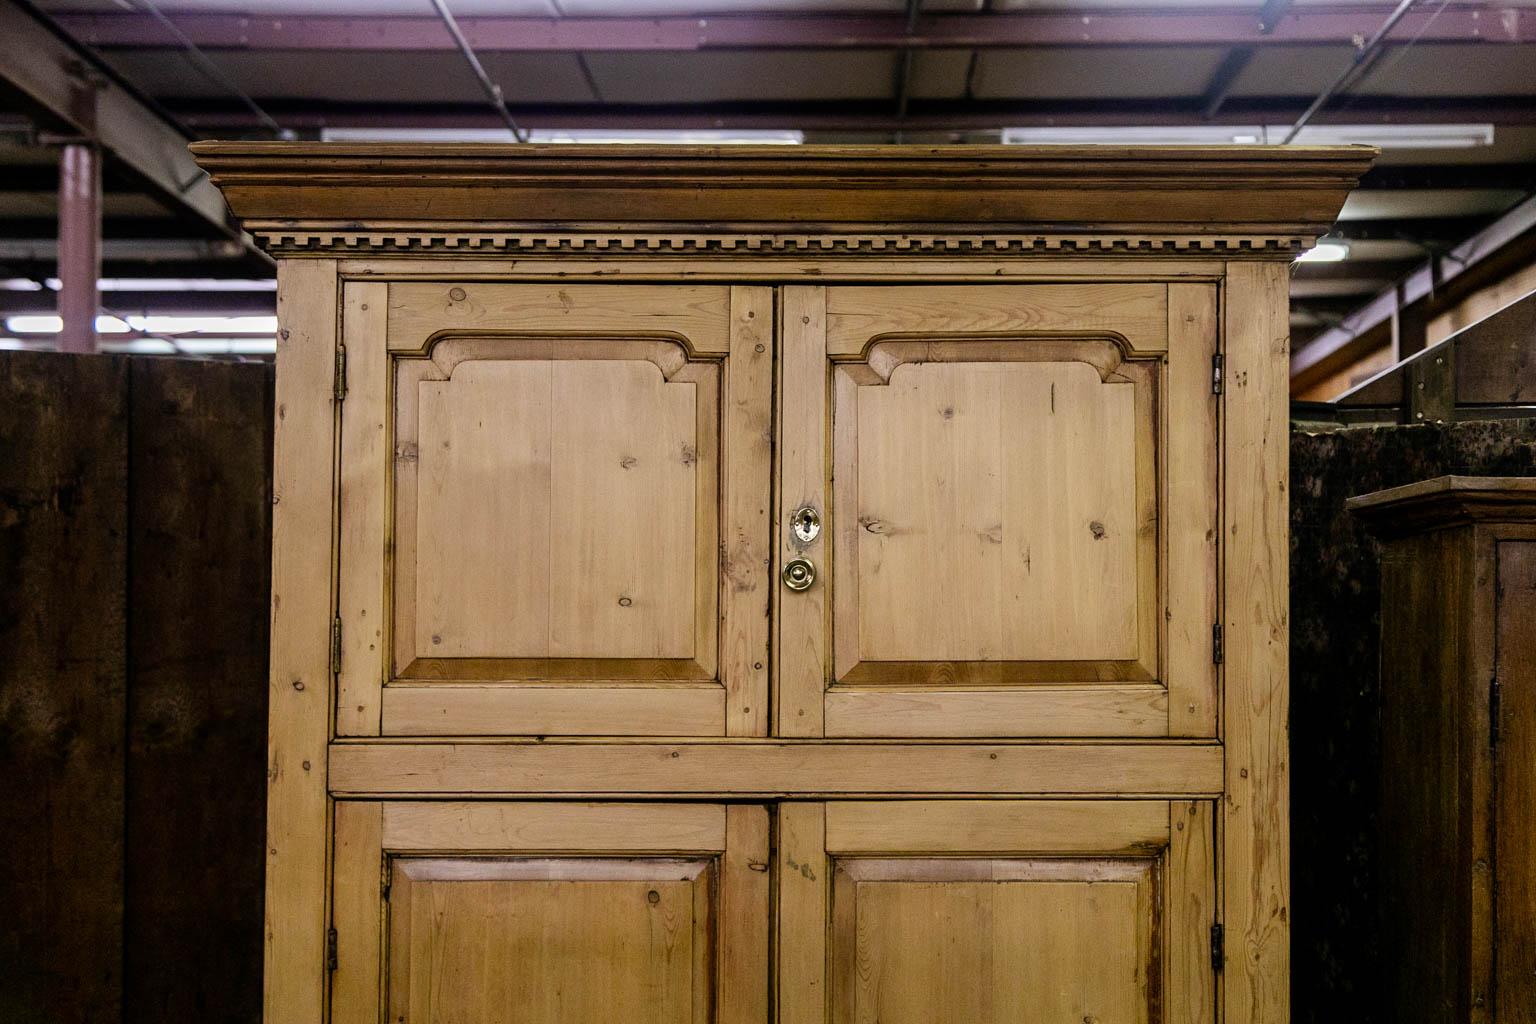 This cupboard has exposed peg construction throughout. The doors have raised panels framed with shaped stiles. The crown molding has carved dentil work. The doors are framed with shaped beading on the stiles and center crossbeam. The upper section